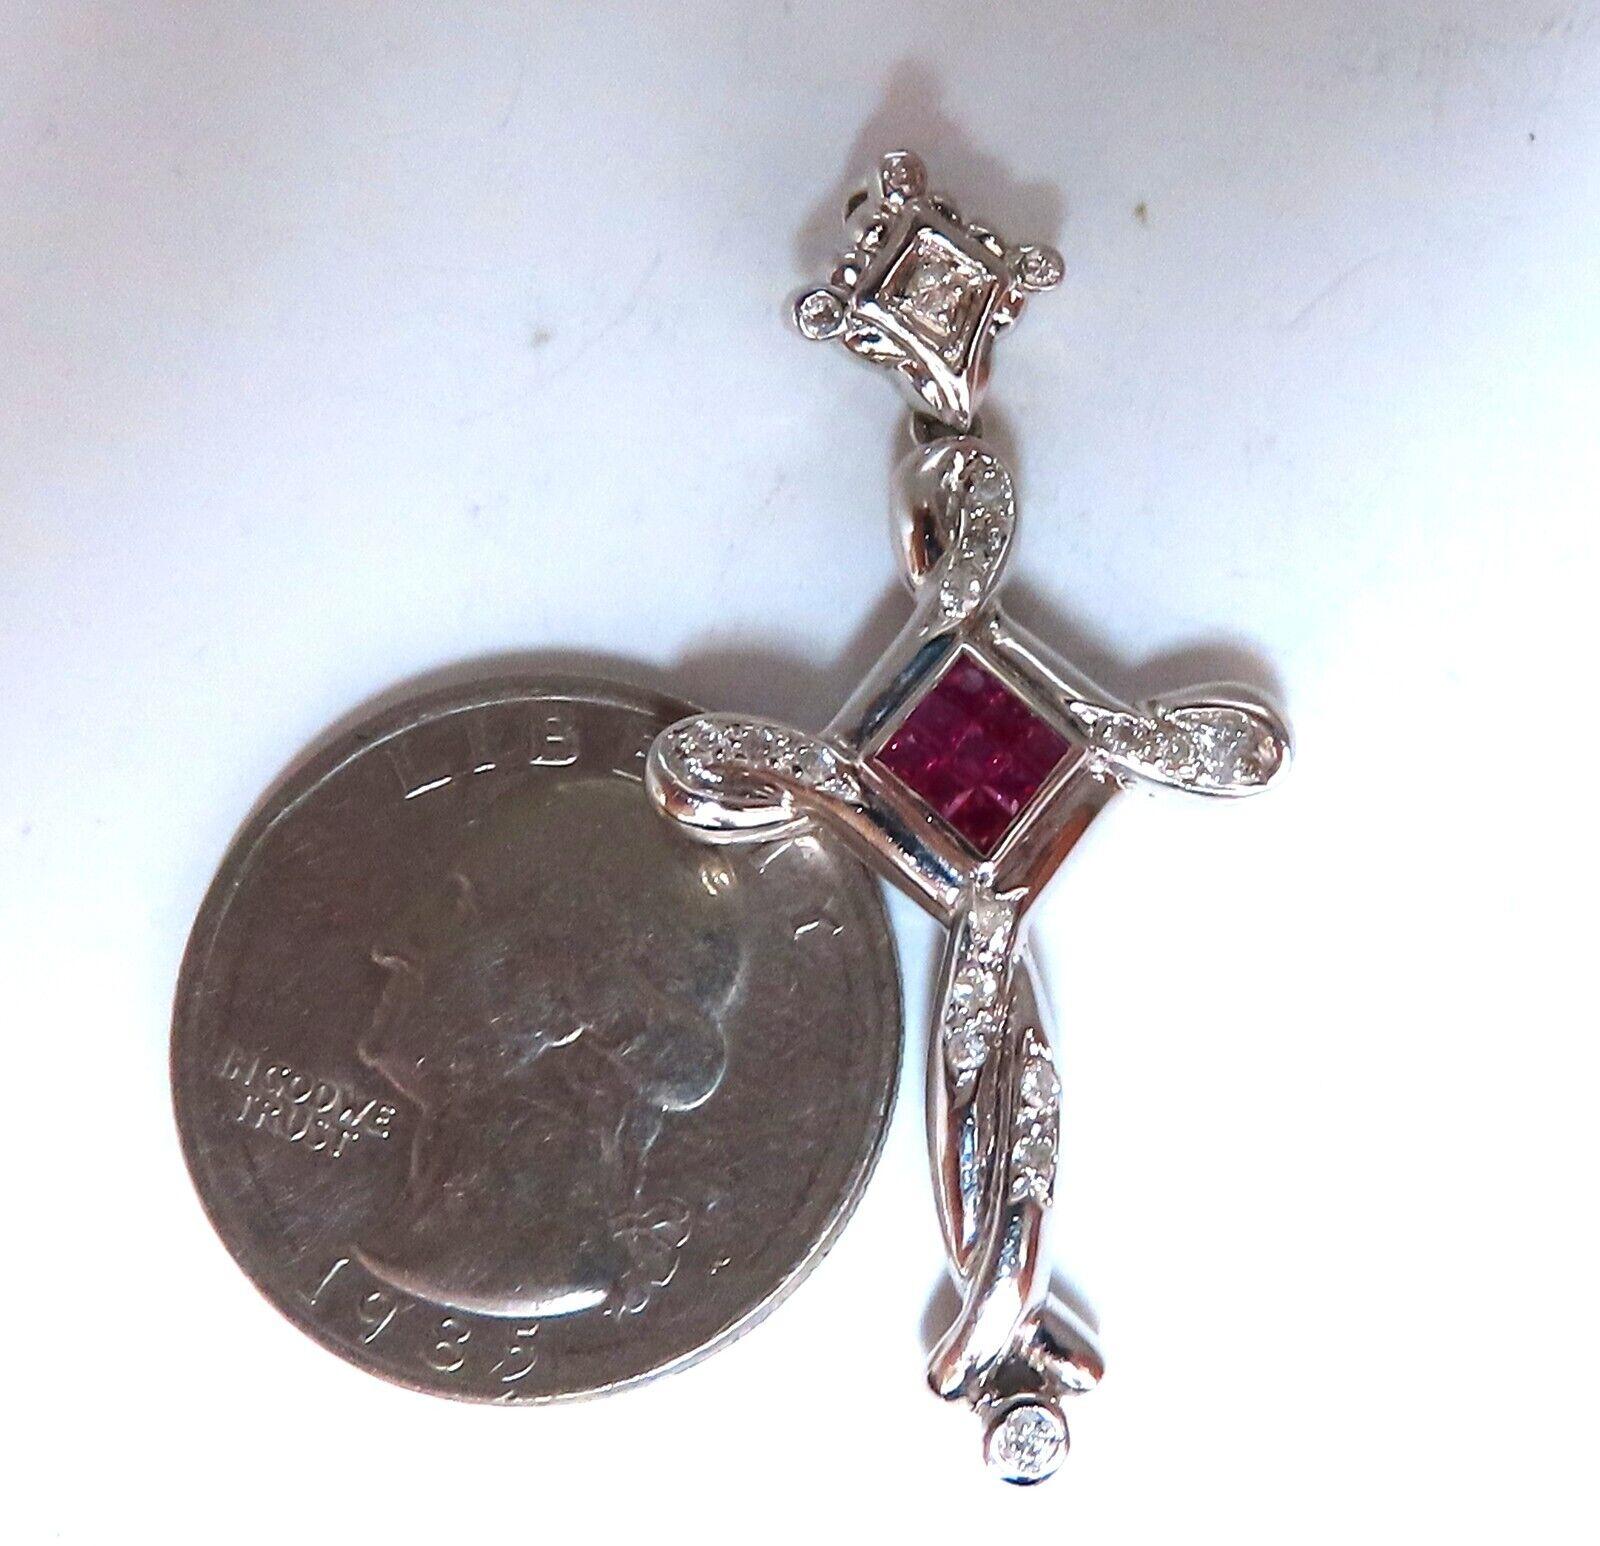 Natural Round Rubies & Diamond Cross.

.20ct. Brilliant Round Cut Natural Diamond

si-1 clarity / H color

Natural .36ct Rubies

Brilliant baguette, full cuts

clean clarity & transparent

Cross: 1.7 x .85 inch

total weight: 6.5 grams.

18kt white